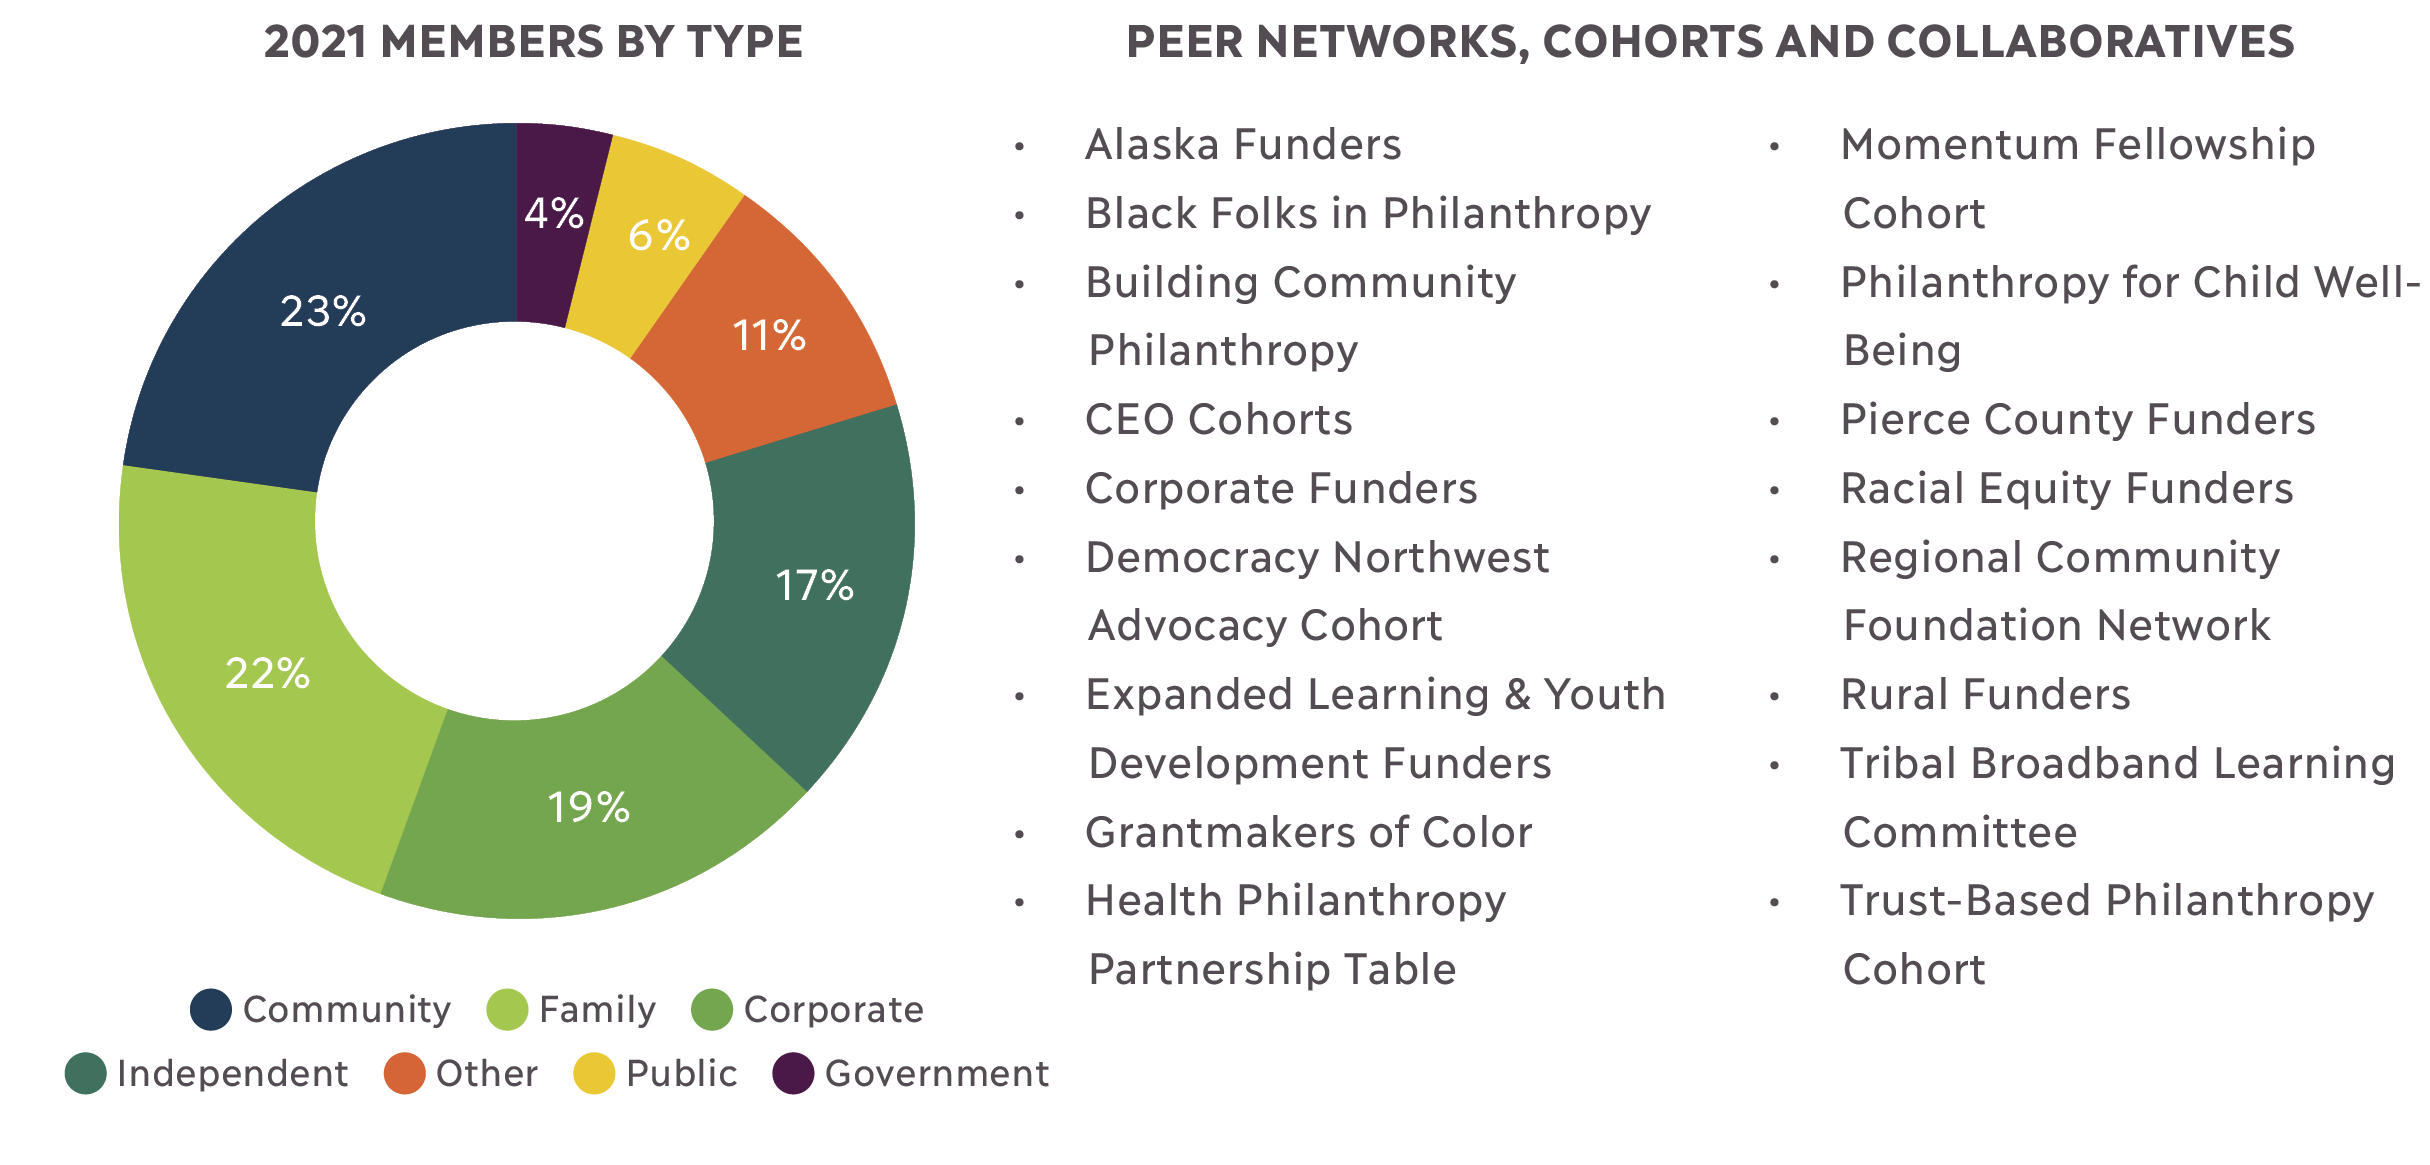 A donut graph of PNW 2021 members by type showing 23% Community foundations; 19% Corporate foundations; 22% Family foundations; 4% Government; 17% Independent foundations; 11% Other; and 6% Public. To the right of the graph is a list of networks.